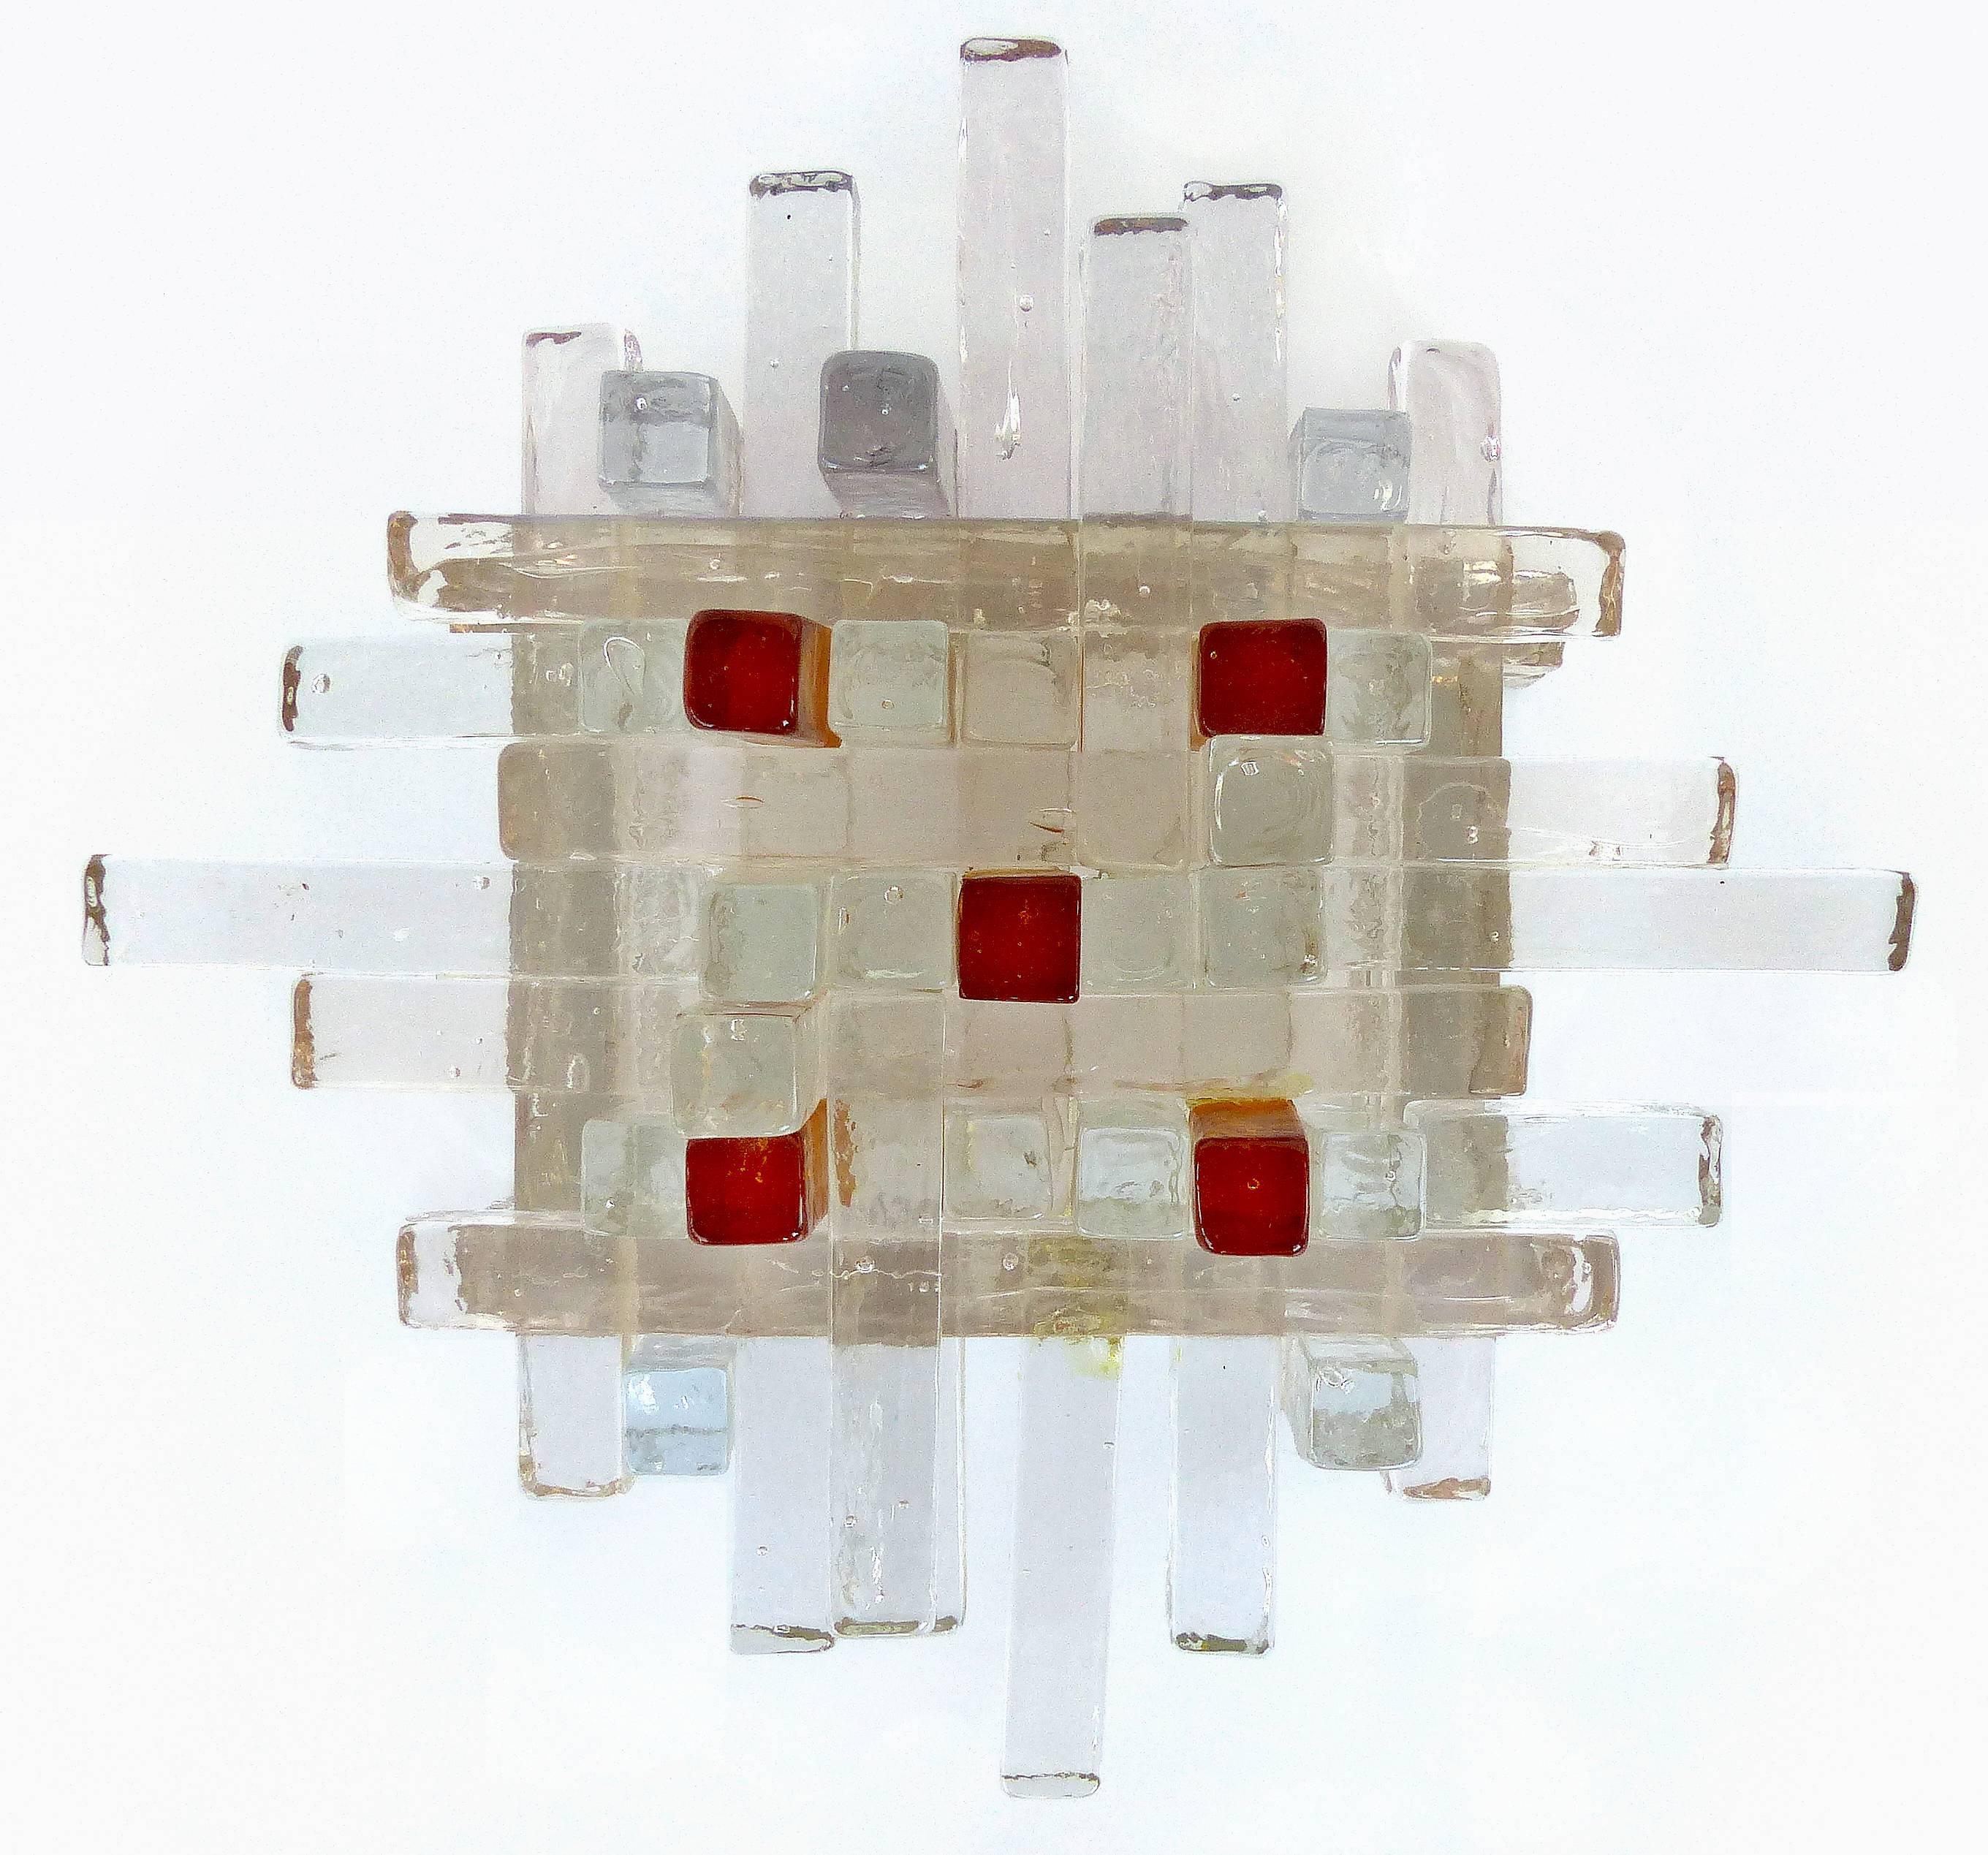 Offered for sale is a pair of Mid-century Murano glass wall sconces by Poliarte of Italy. The rectangular fused art glass rods are clear with textures to diffuse the light . Each sconce holds two standard European base sockets on a metal frame.